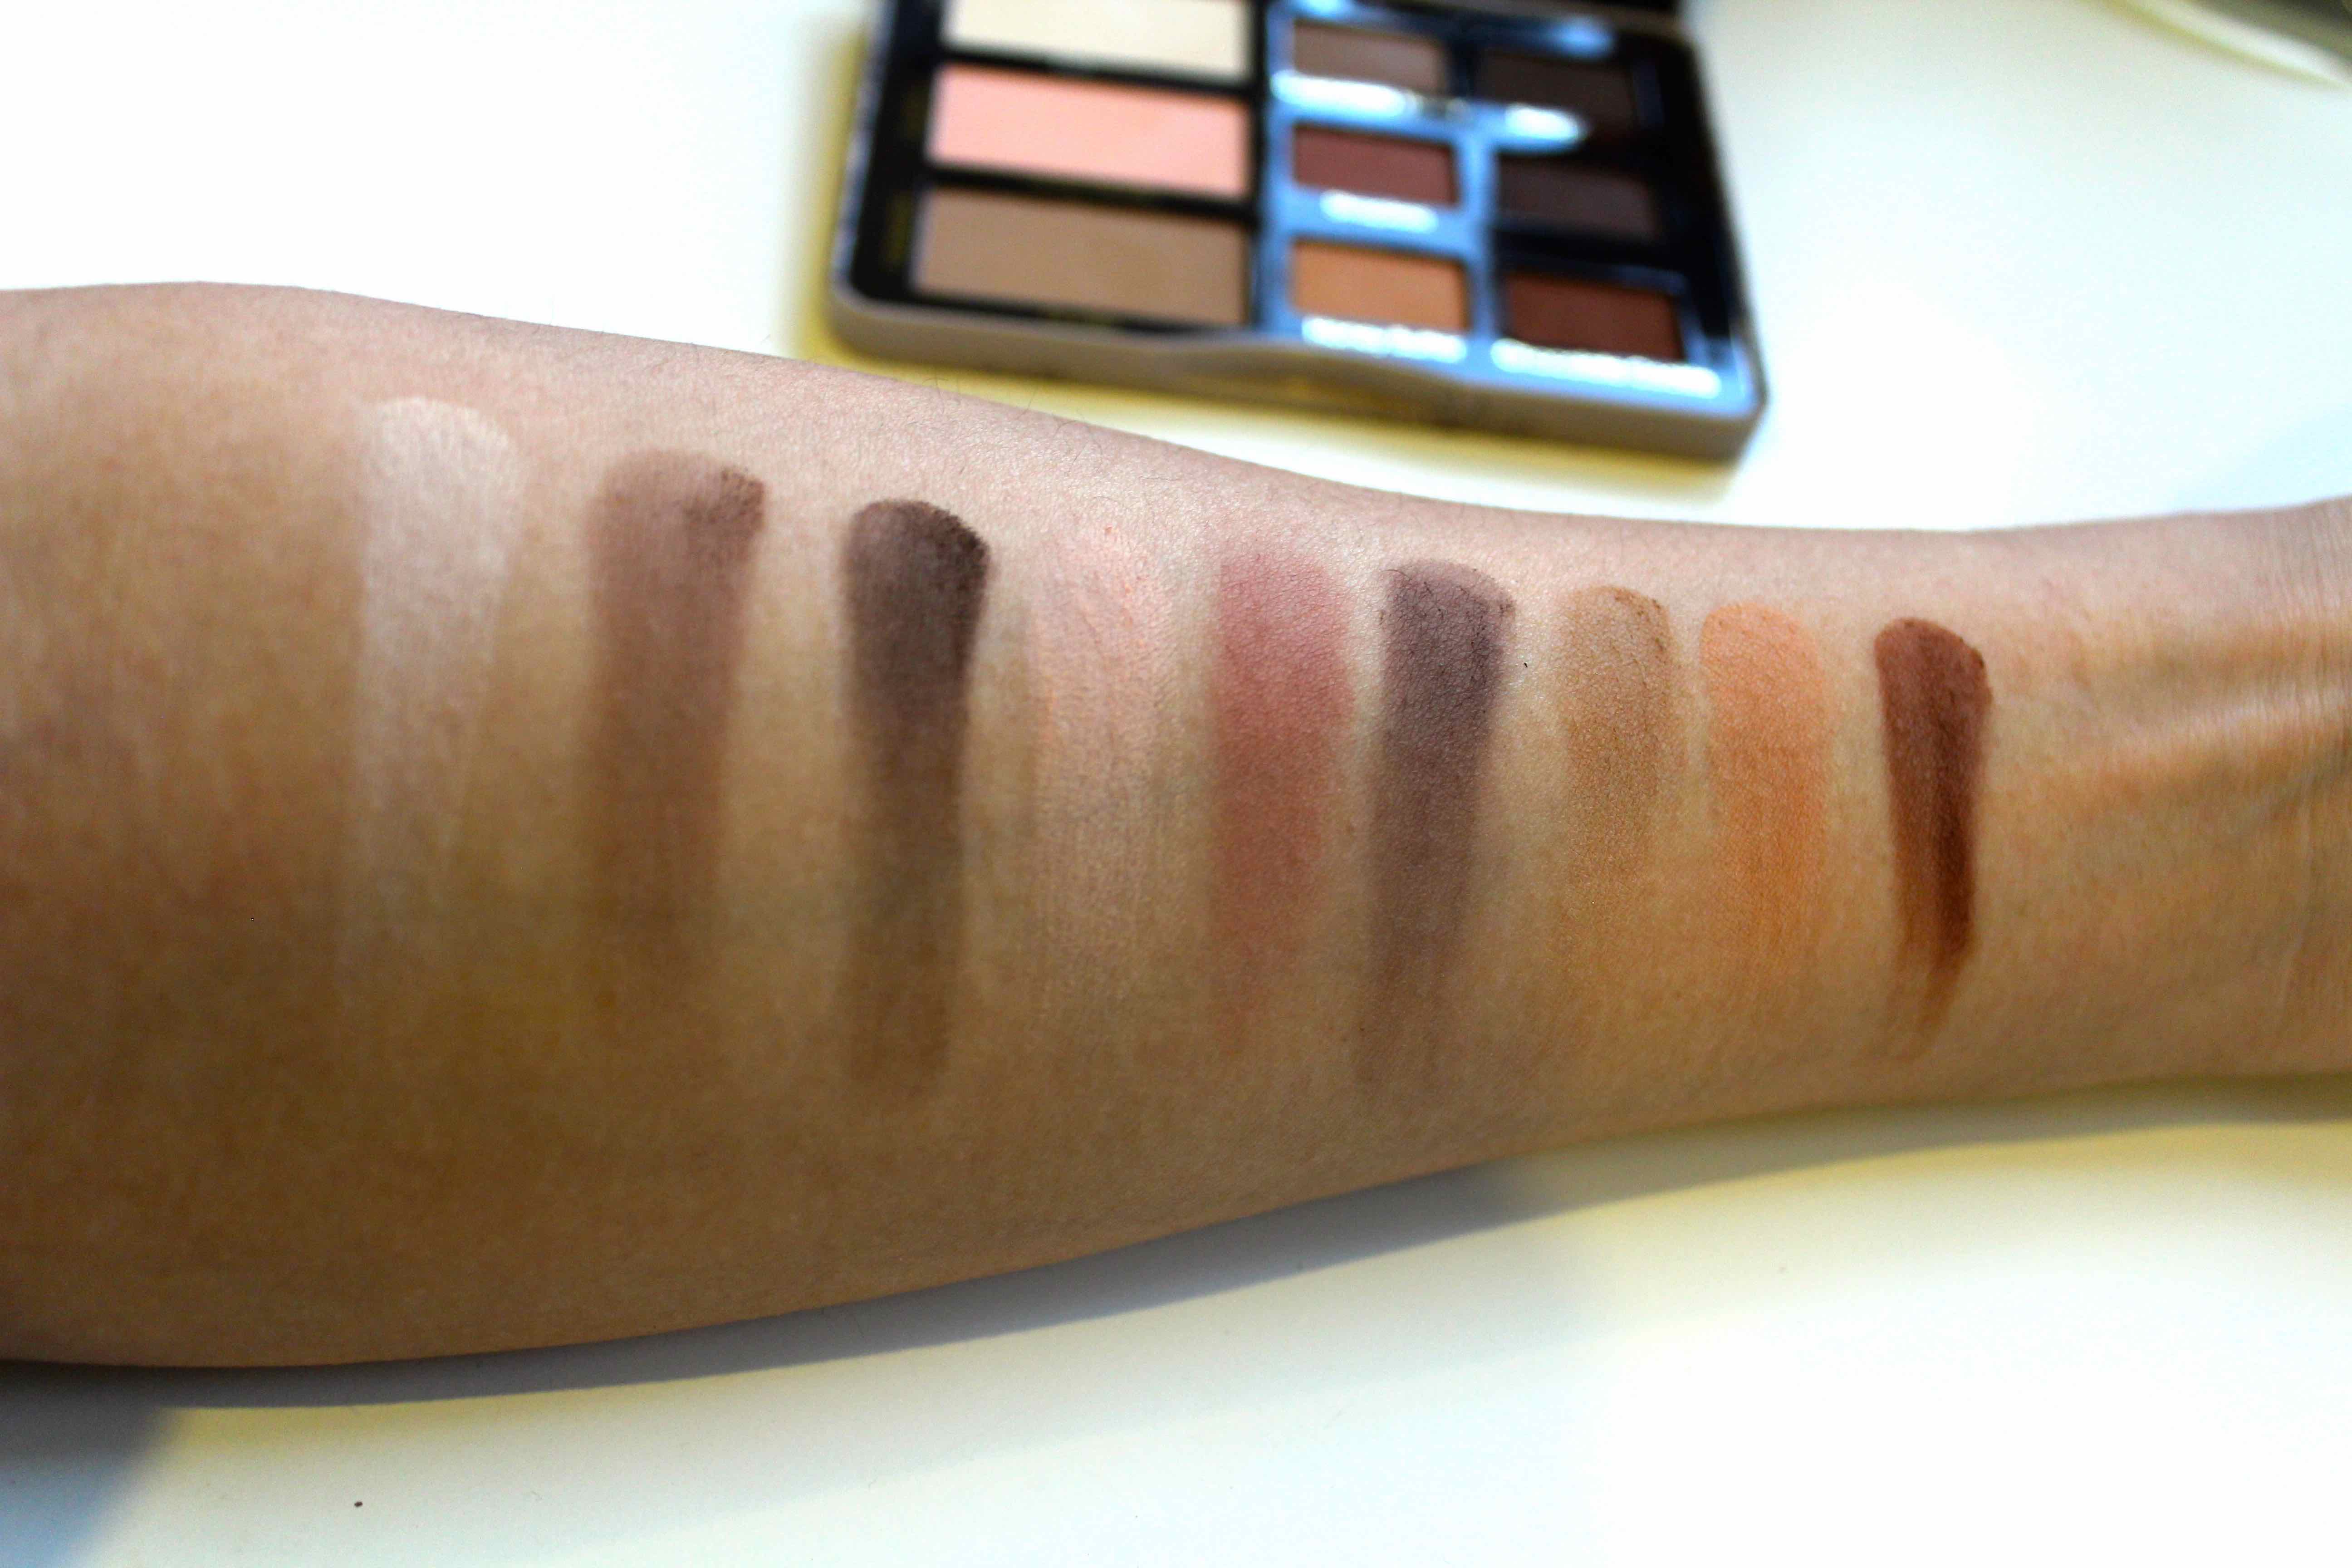 Too Faced Natural Matte Eyeshadow Swatches on arm by Face Made Up